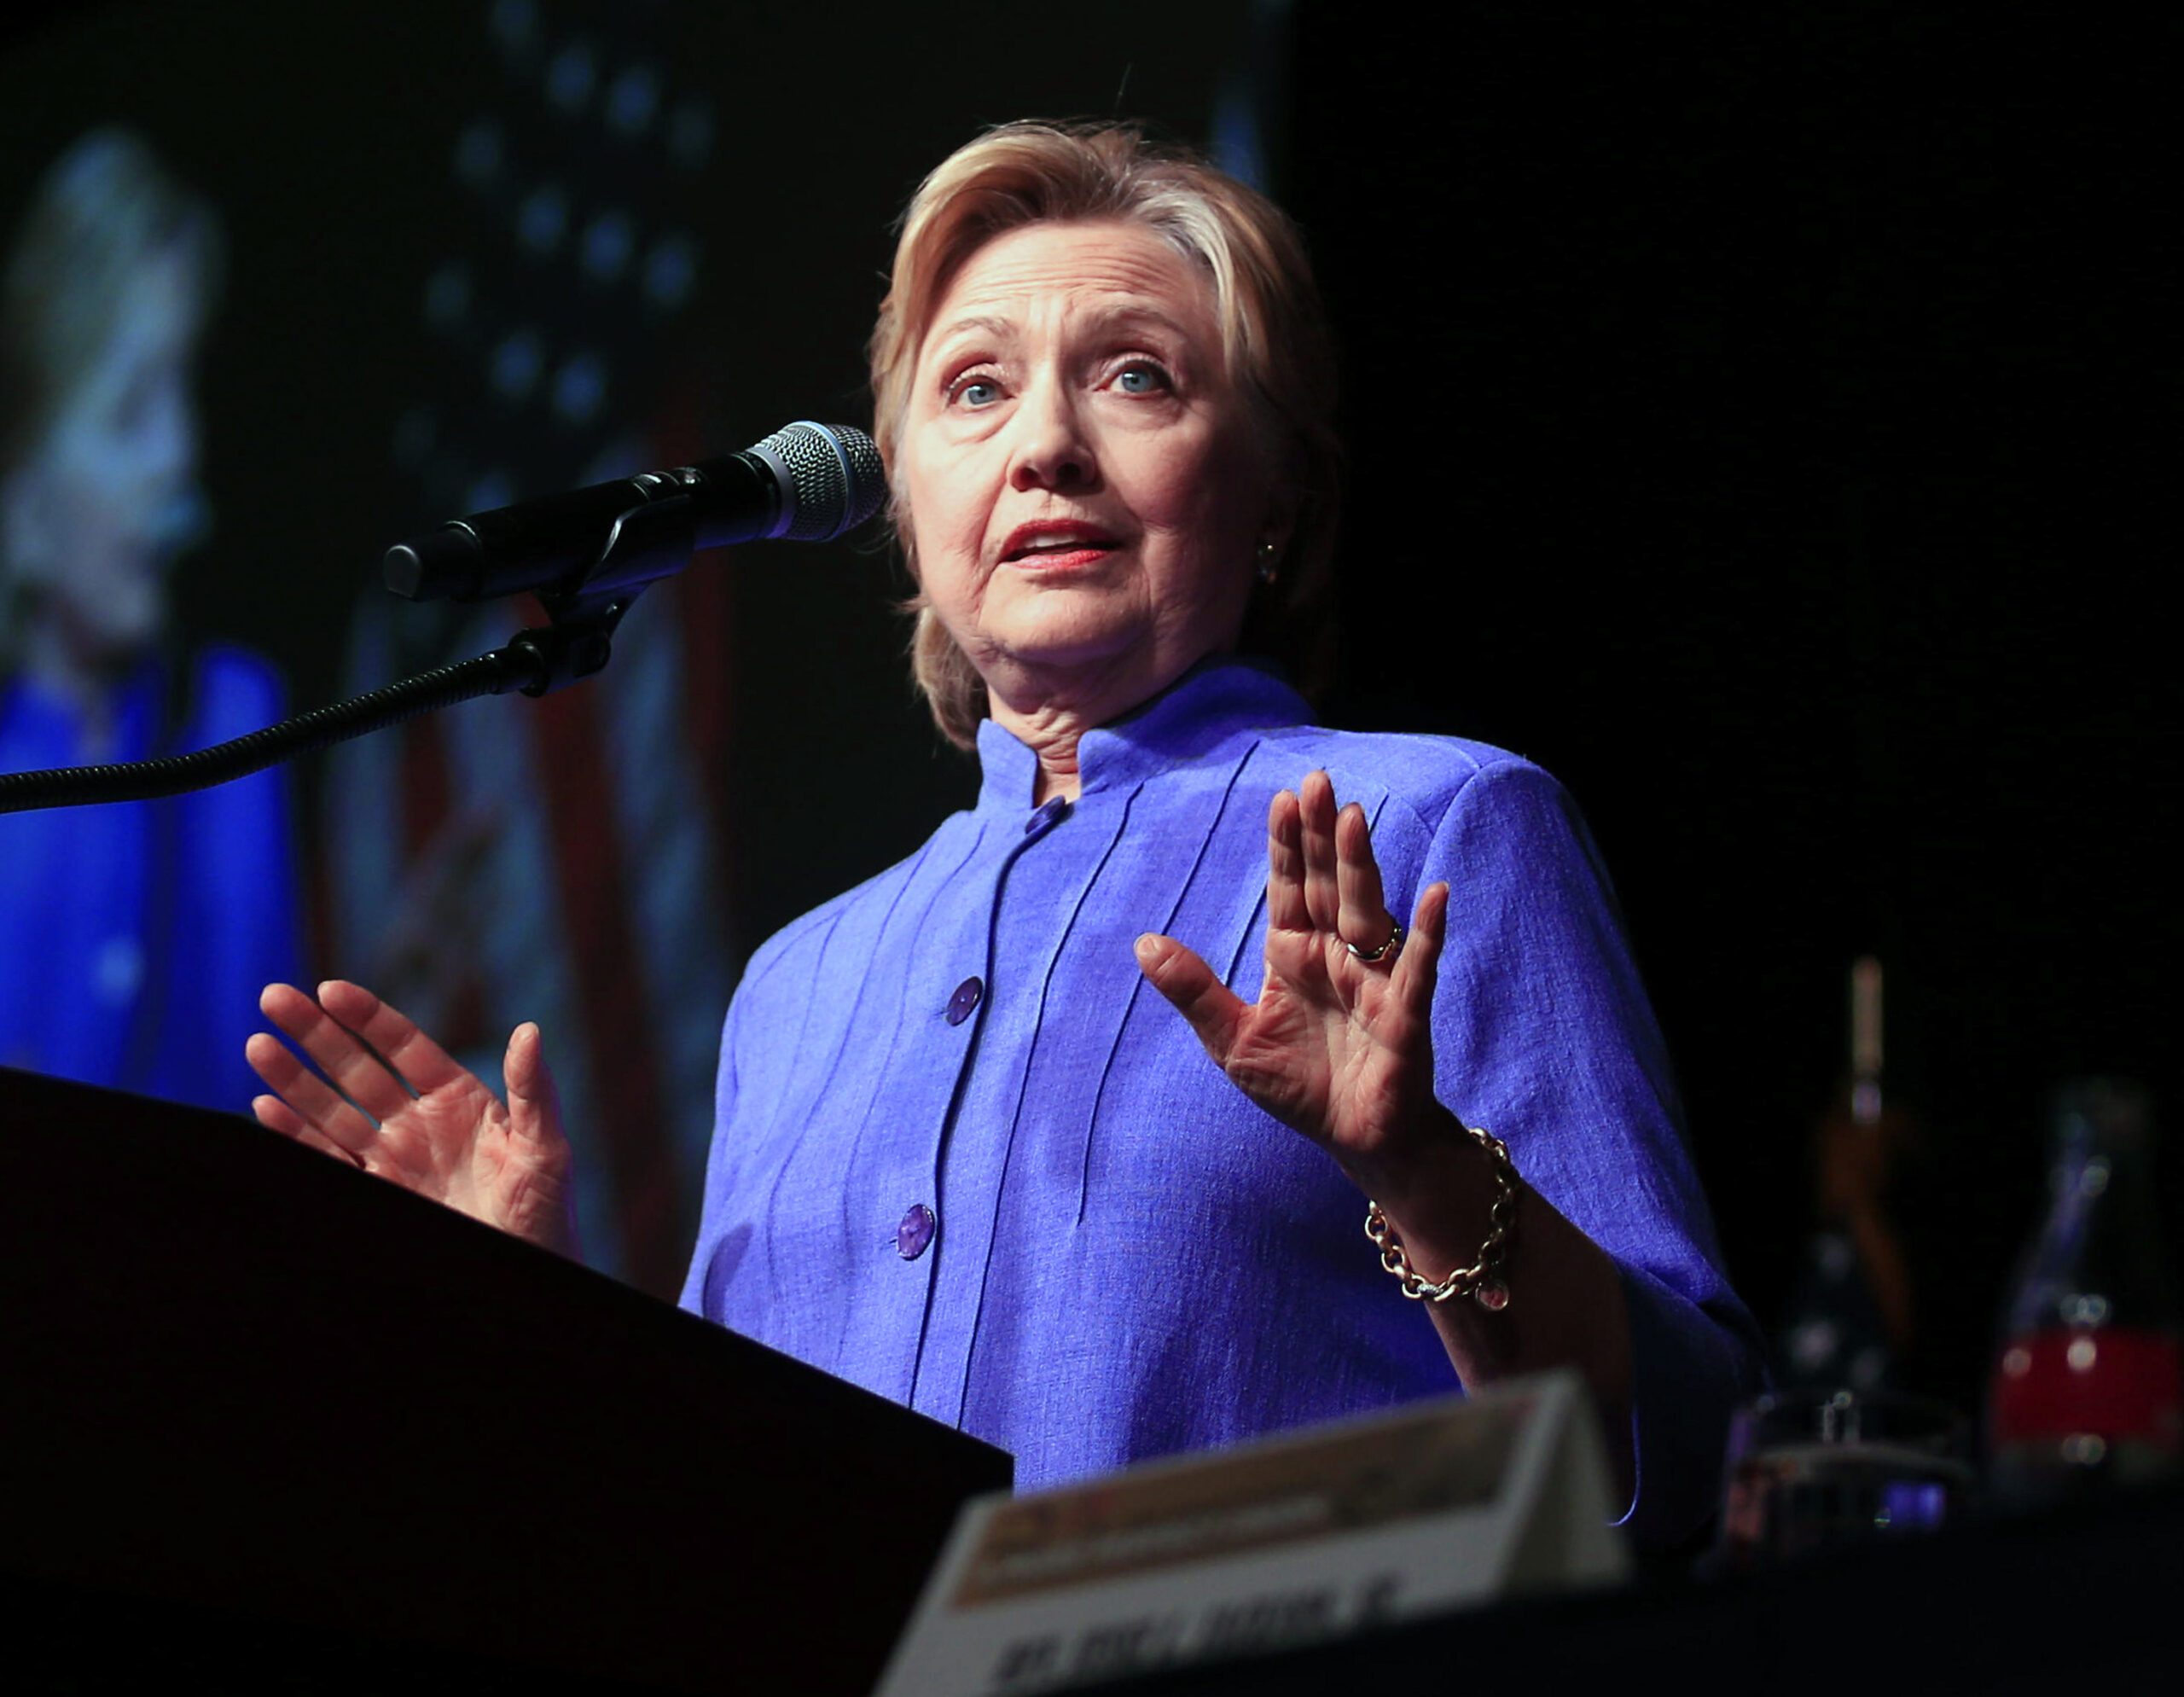 Clinton ‘pleased’ to speak with FBI in email probe